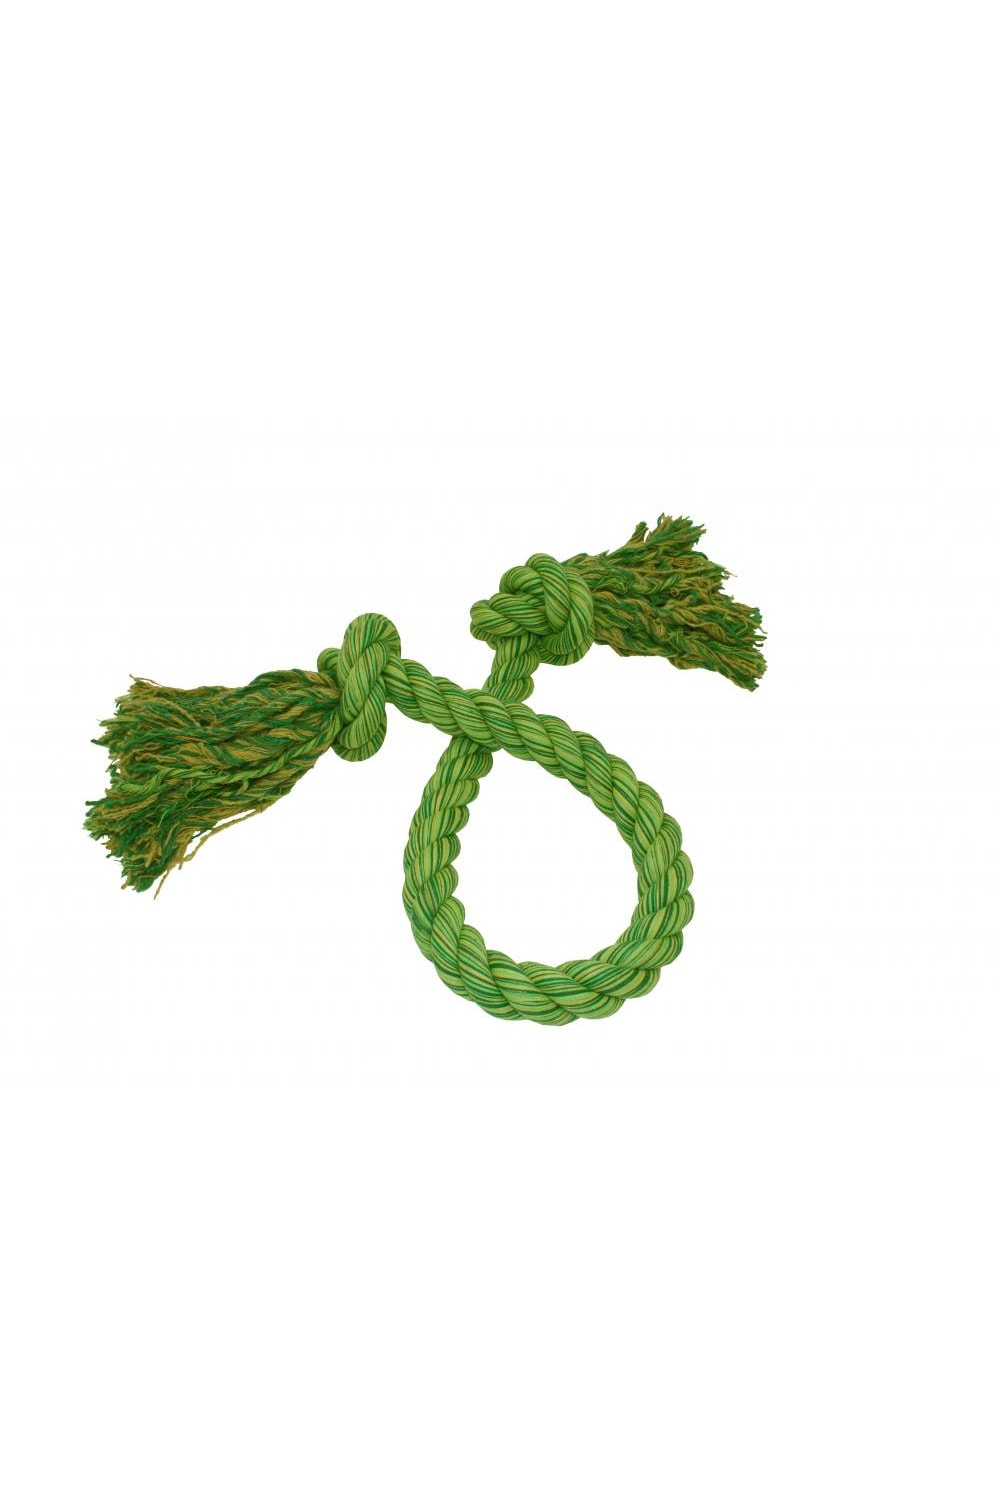 Happy Pet Tug Rope King Size (May Vary) (One Size)